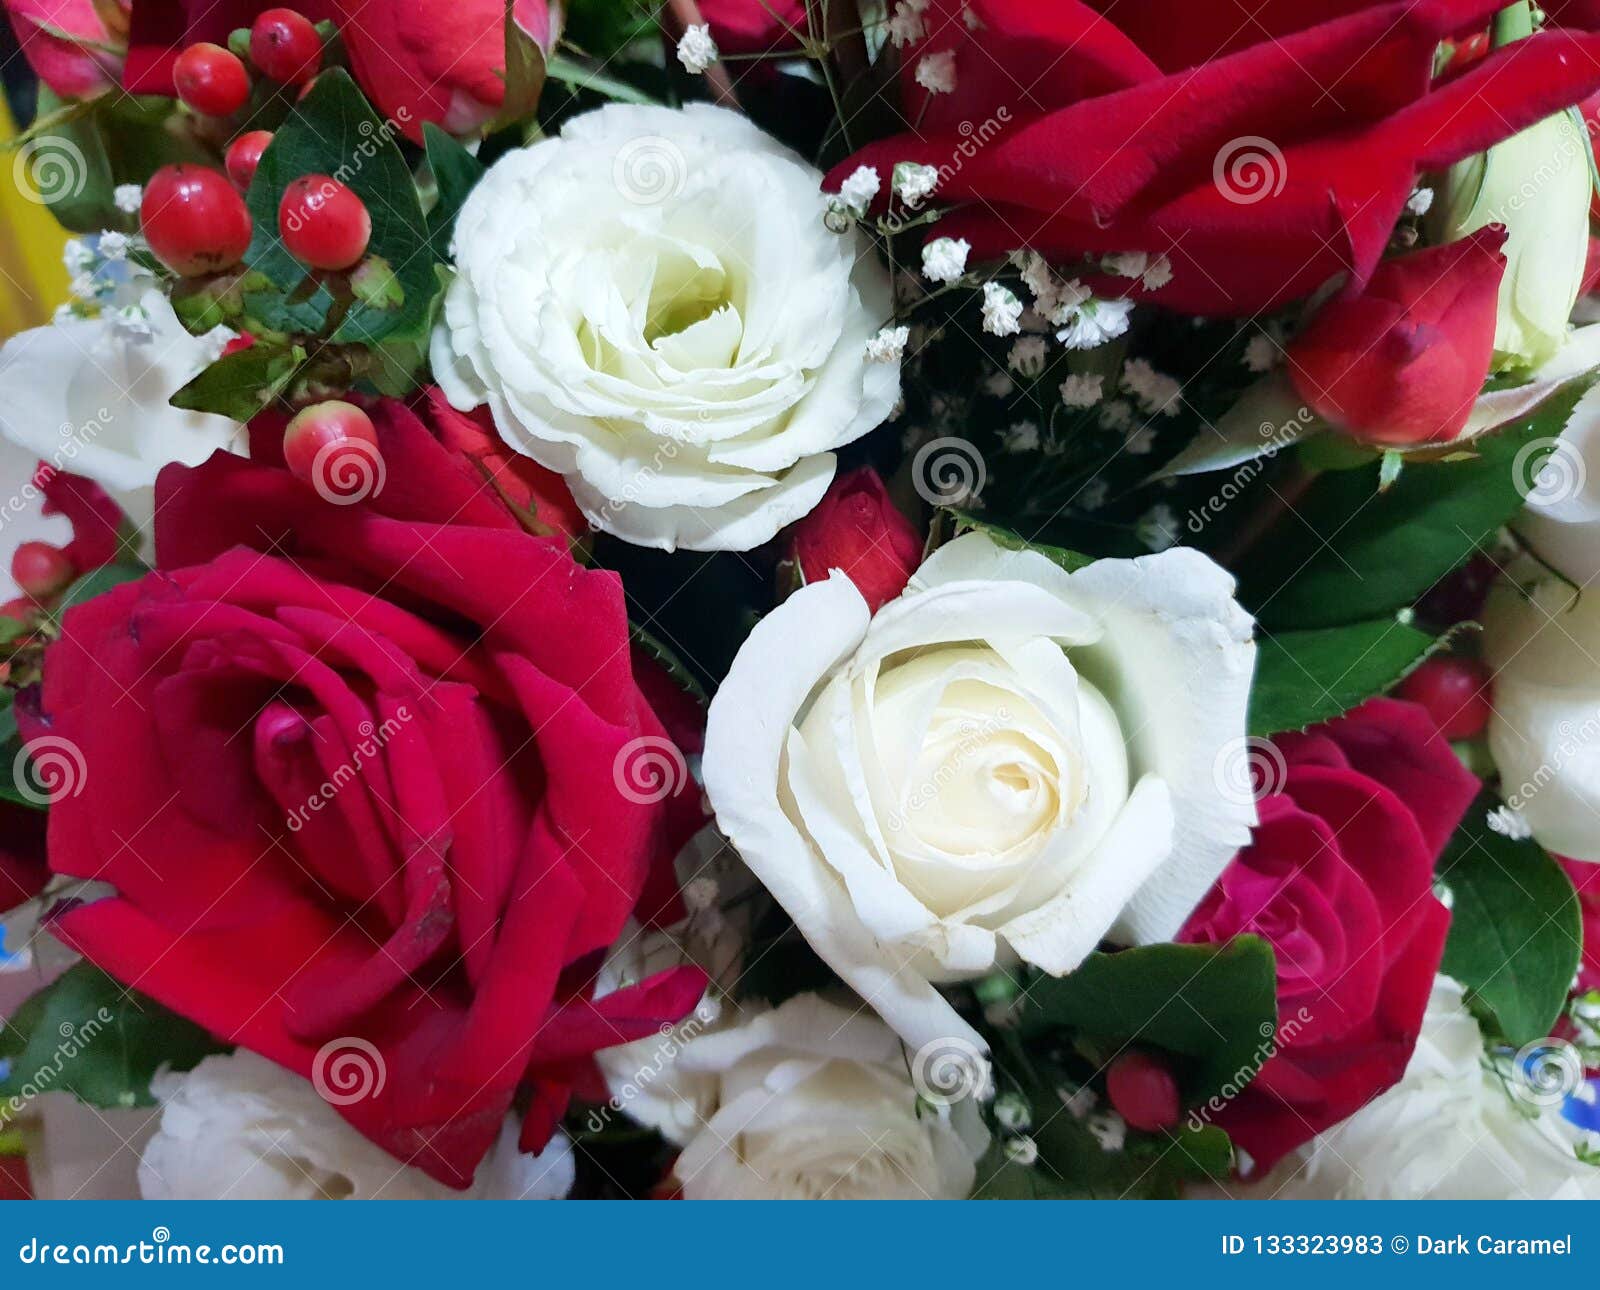 Beautiful Big Roses Flower, Valentine Day, Love Concept, Top View Stock  Image - Image of natural, element: 133323983